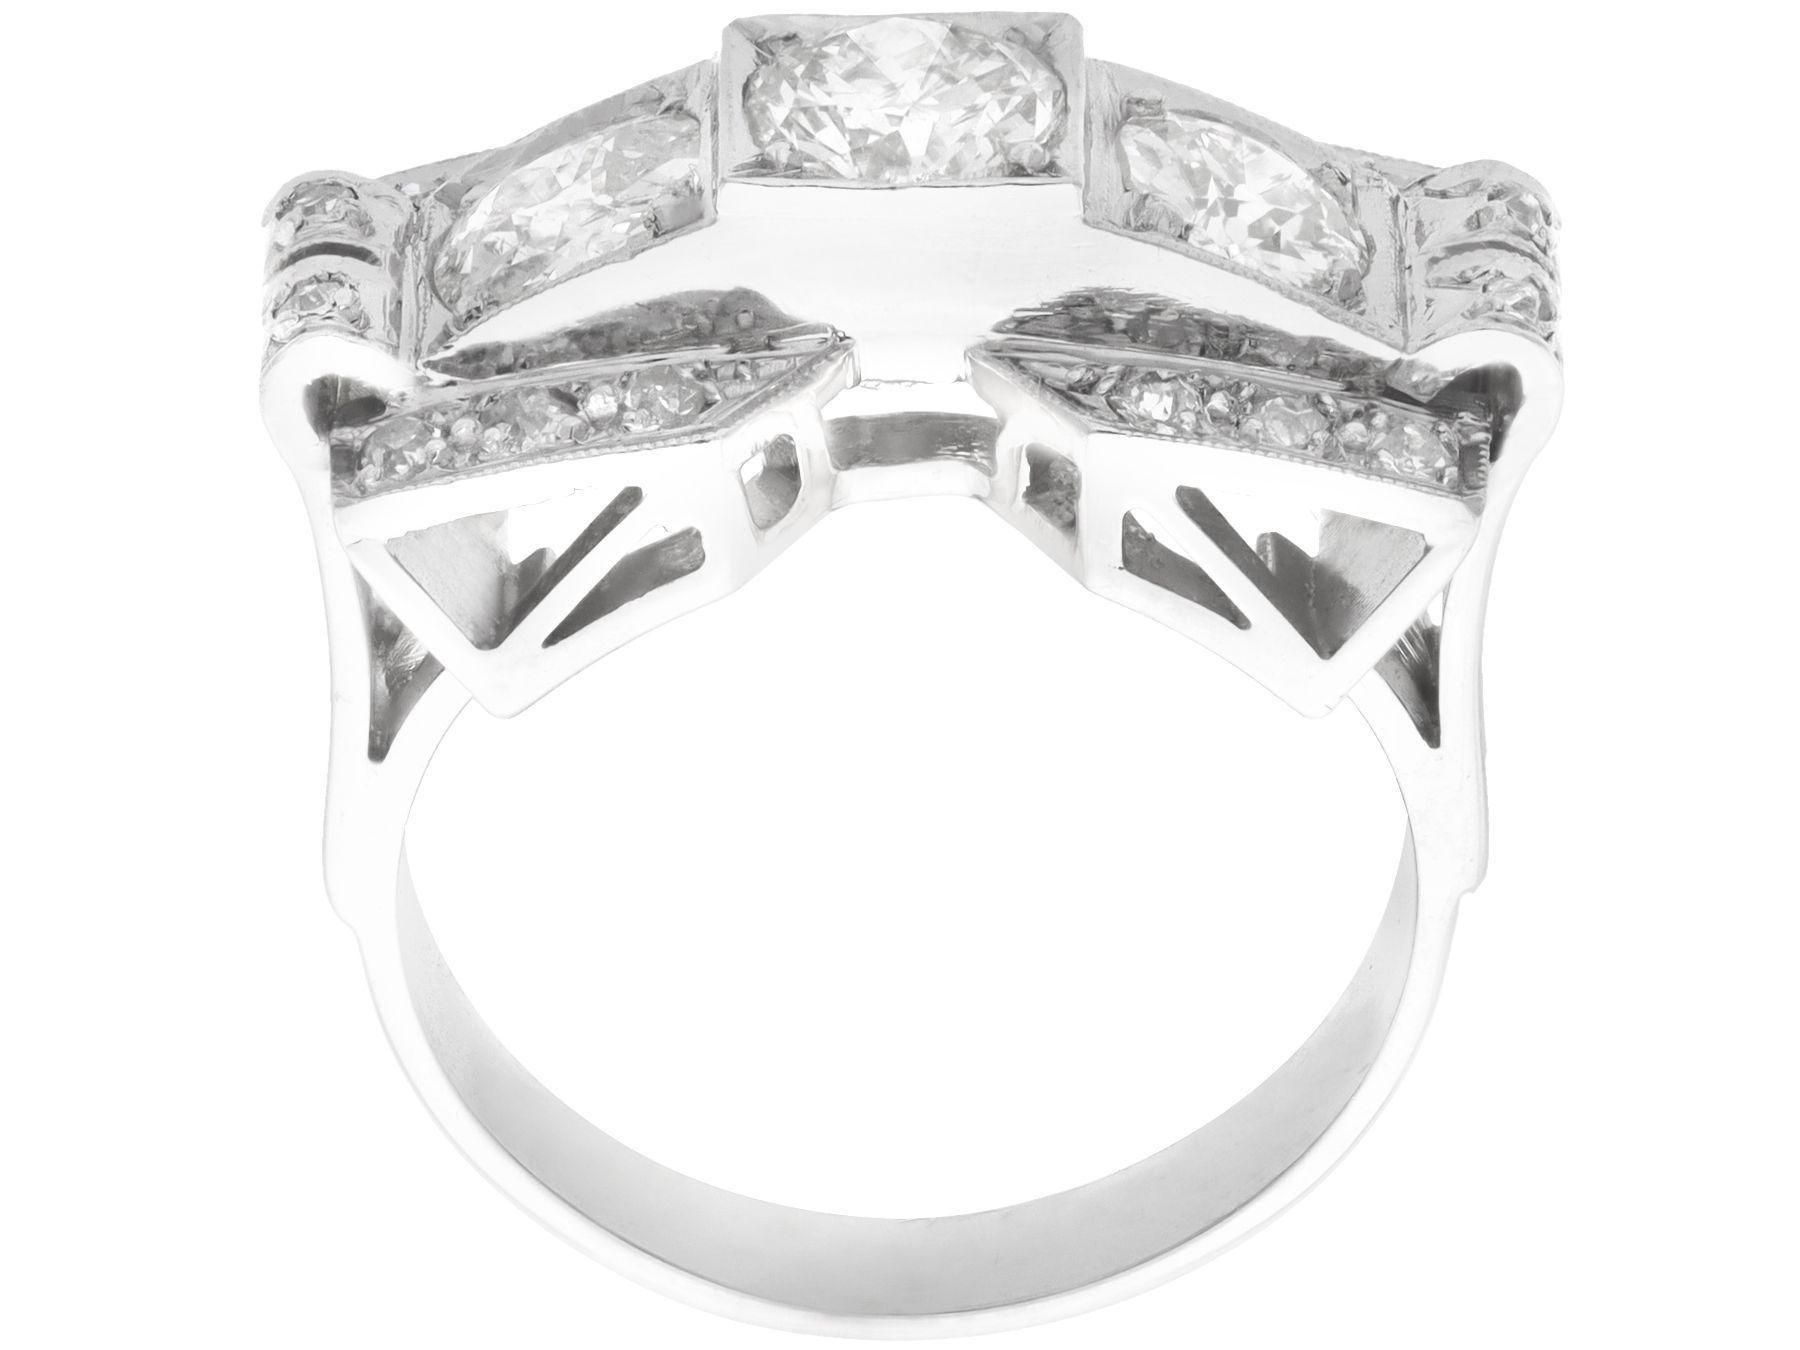 Women's or Men's Antique Art Deco 2.18 Carat Diamond and White Gold Dress Ring For Sale